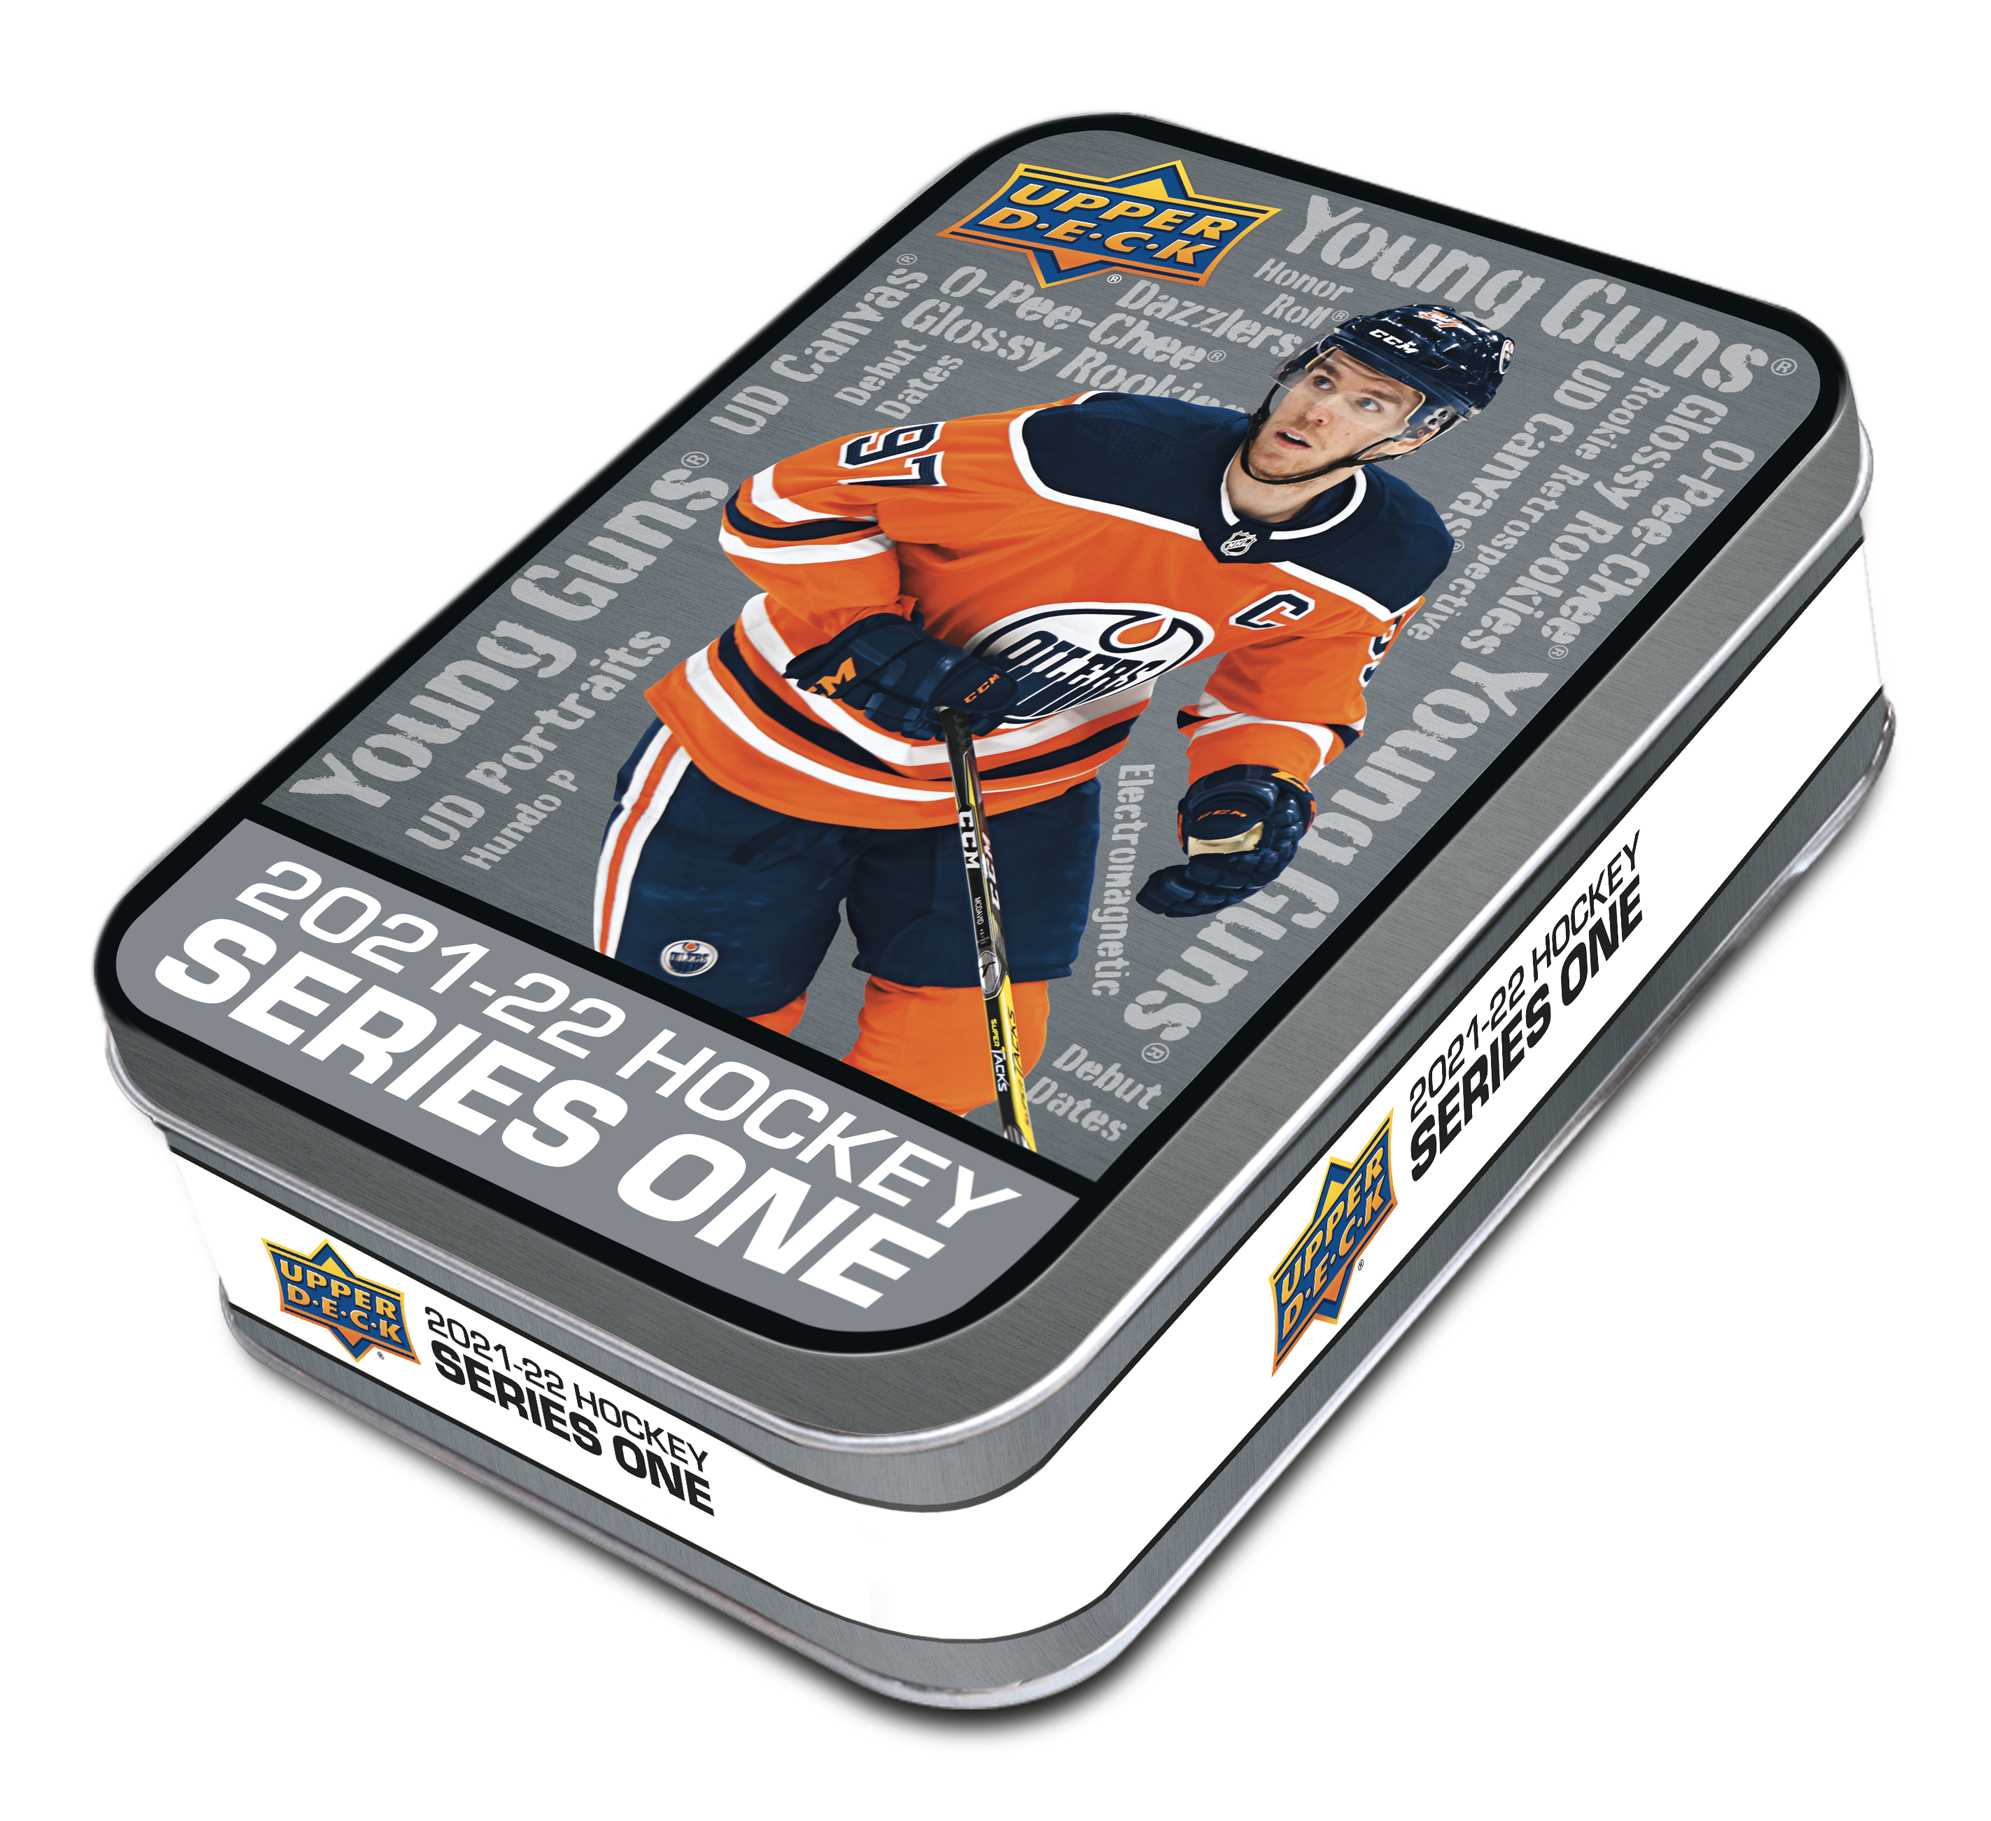 2021-22 UPPER DECK HOCKEY SERIES 1 COLLECTOR TIN SEALED CASE OF 12 - PRE ORDER